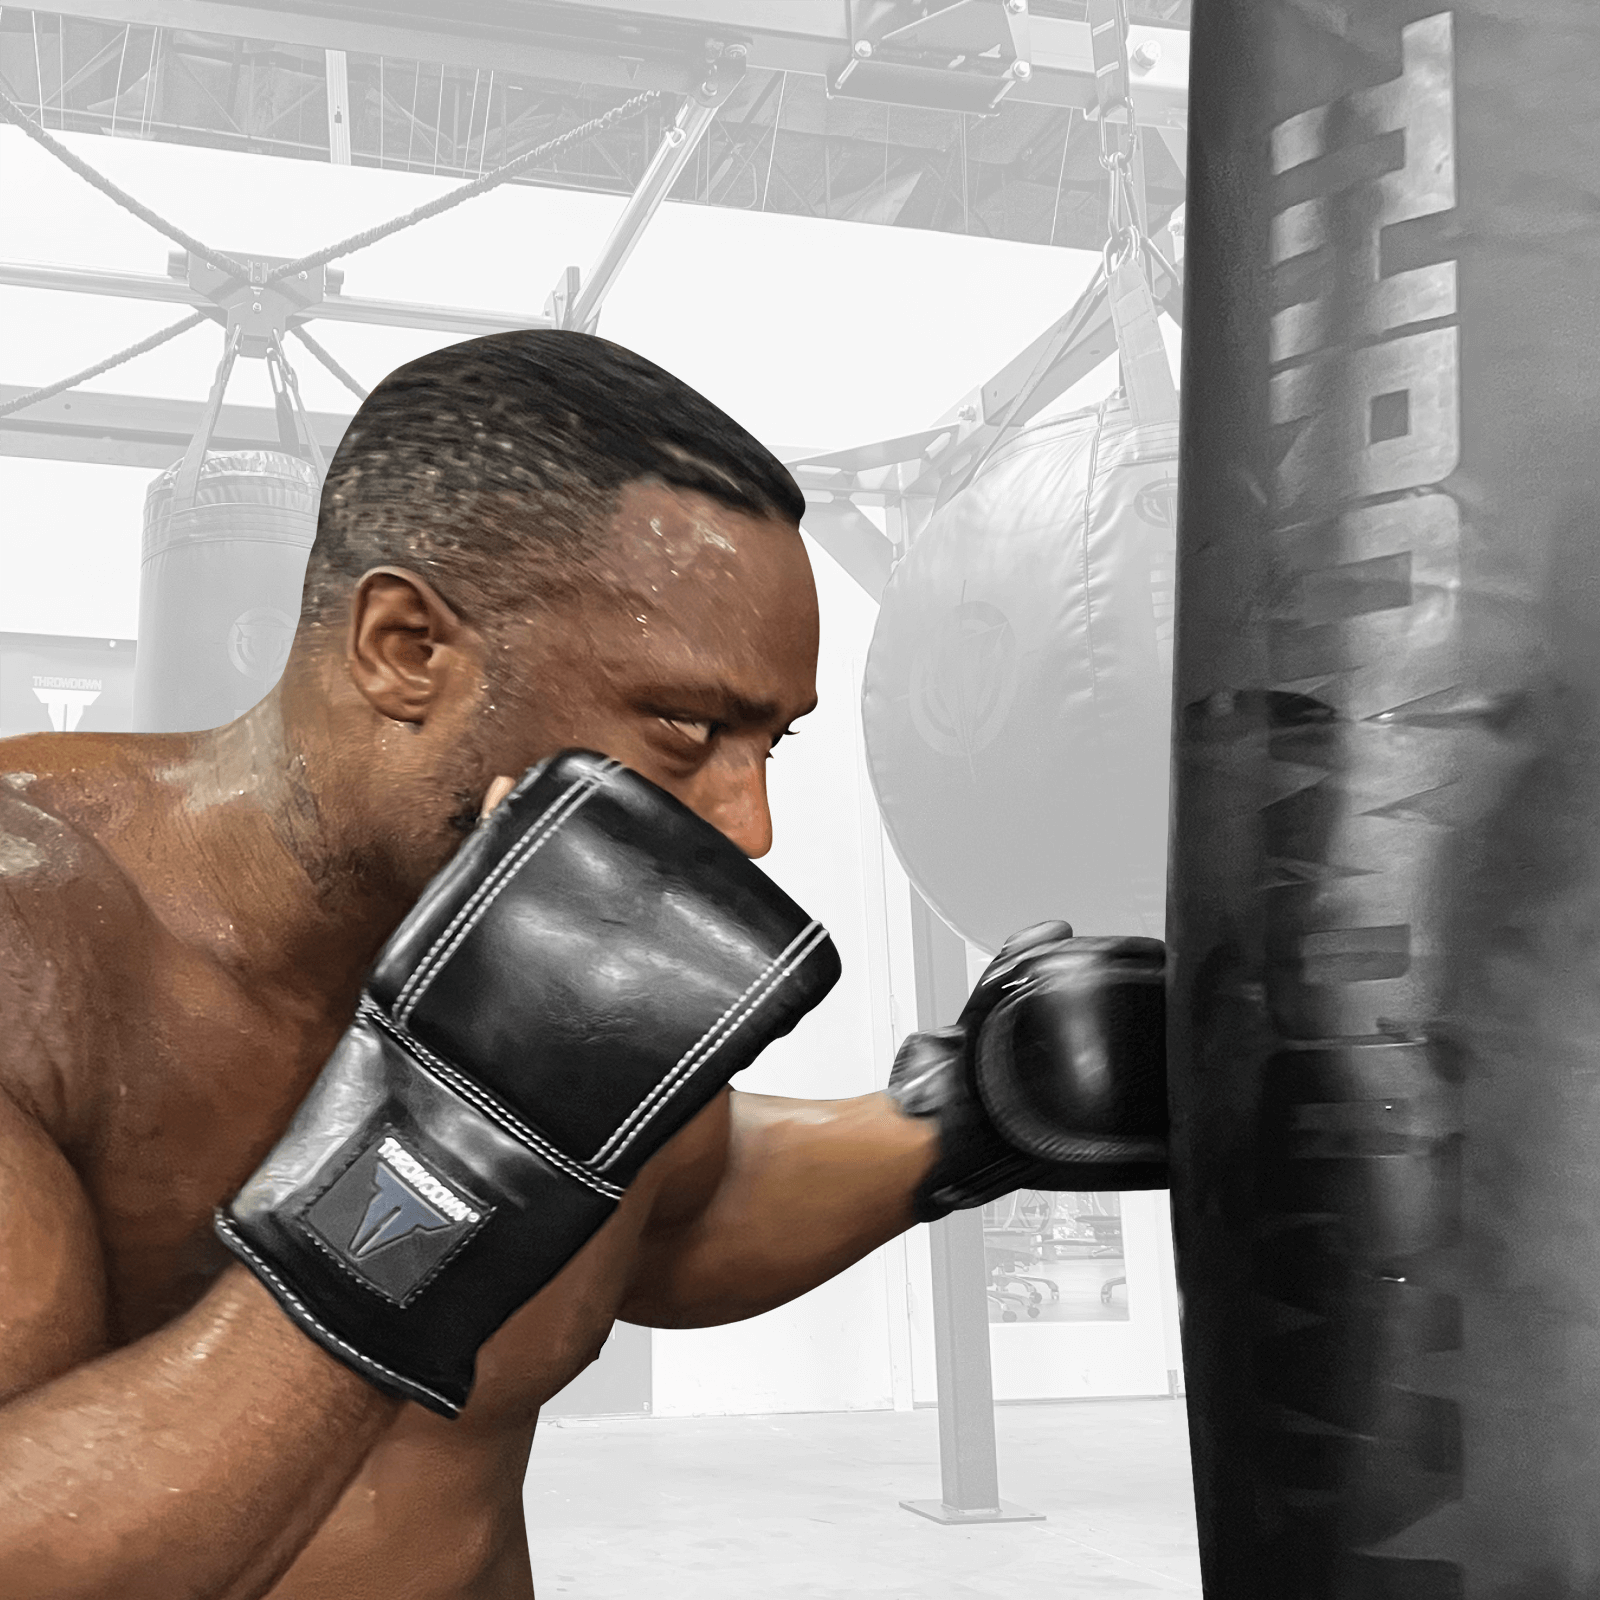 Boxing = Member Retention and High ROI